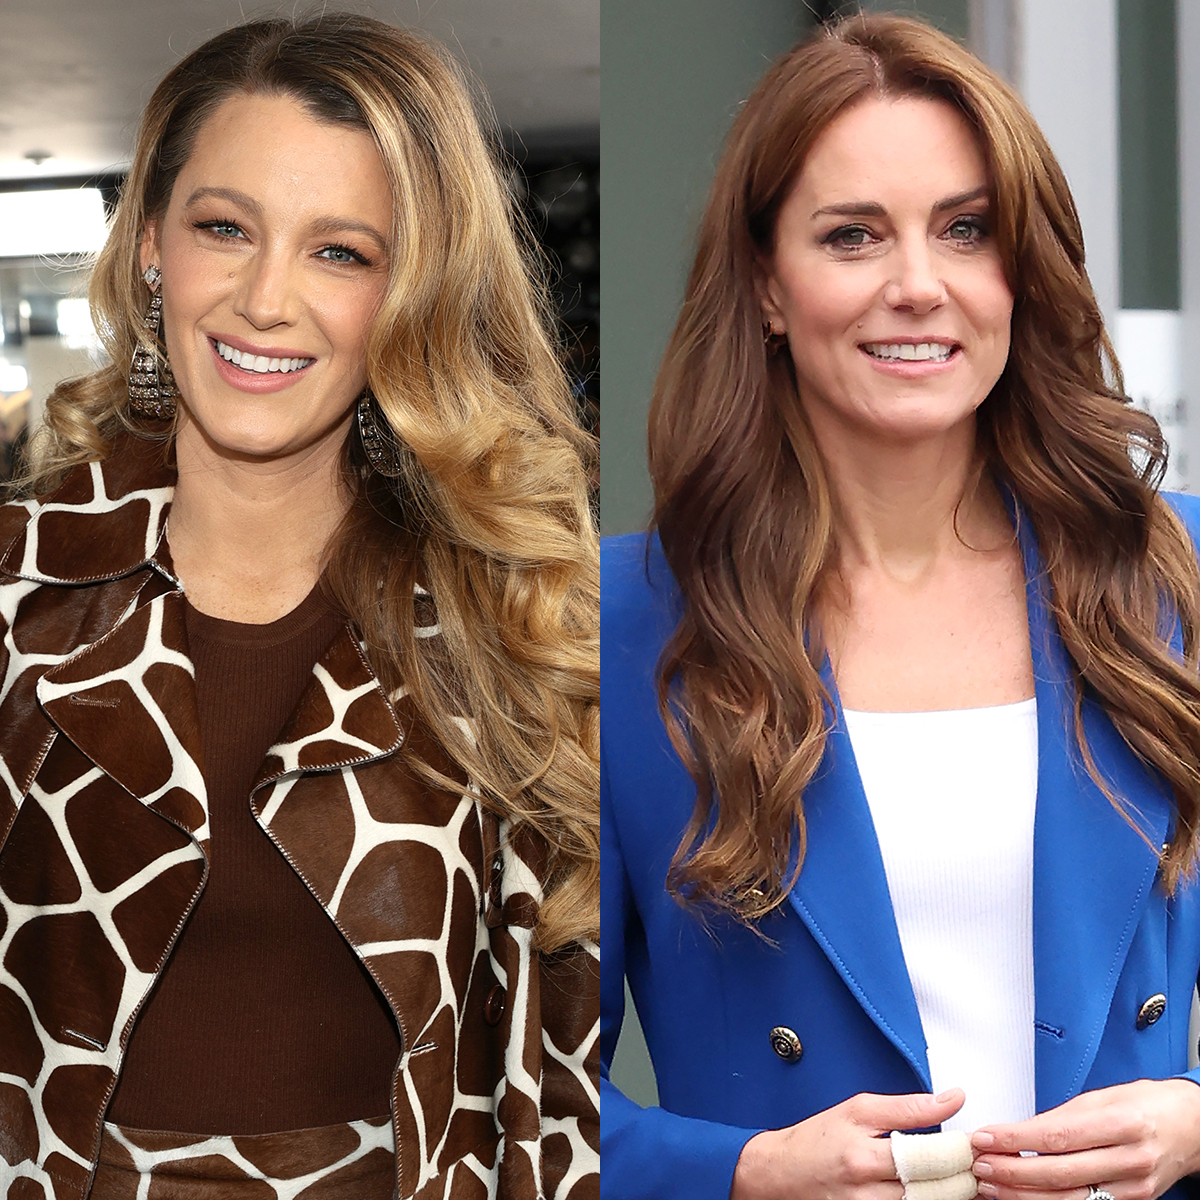 Blake Lively Apologizes to Kate Middleton for Photoshop Controversy After Learning of Her Cancer Diagnosis